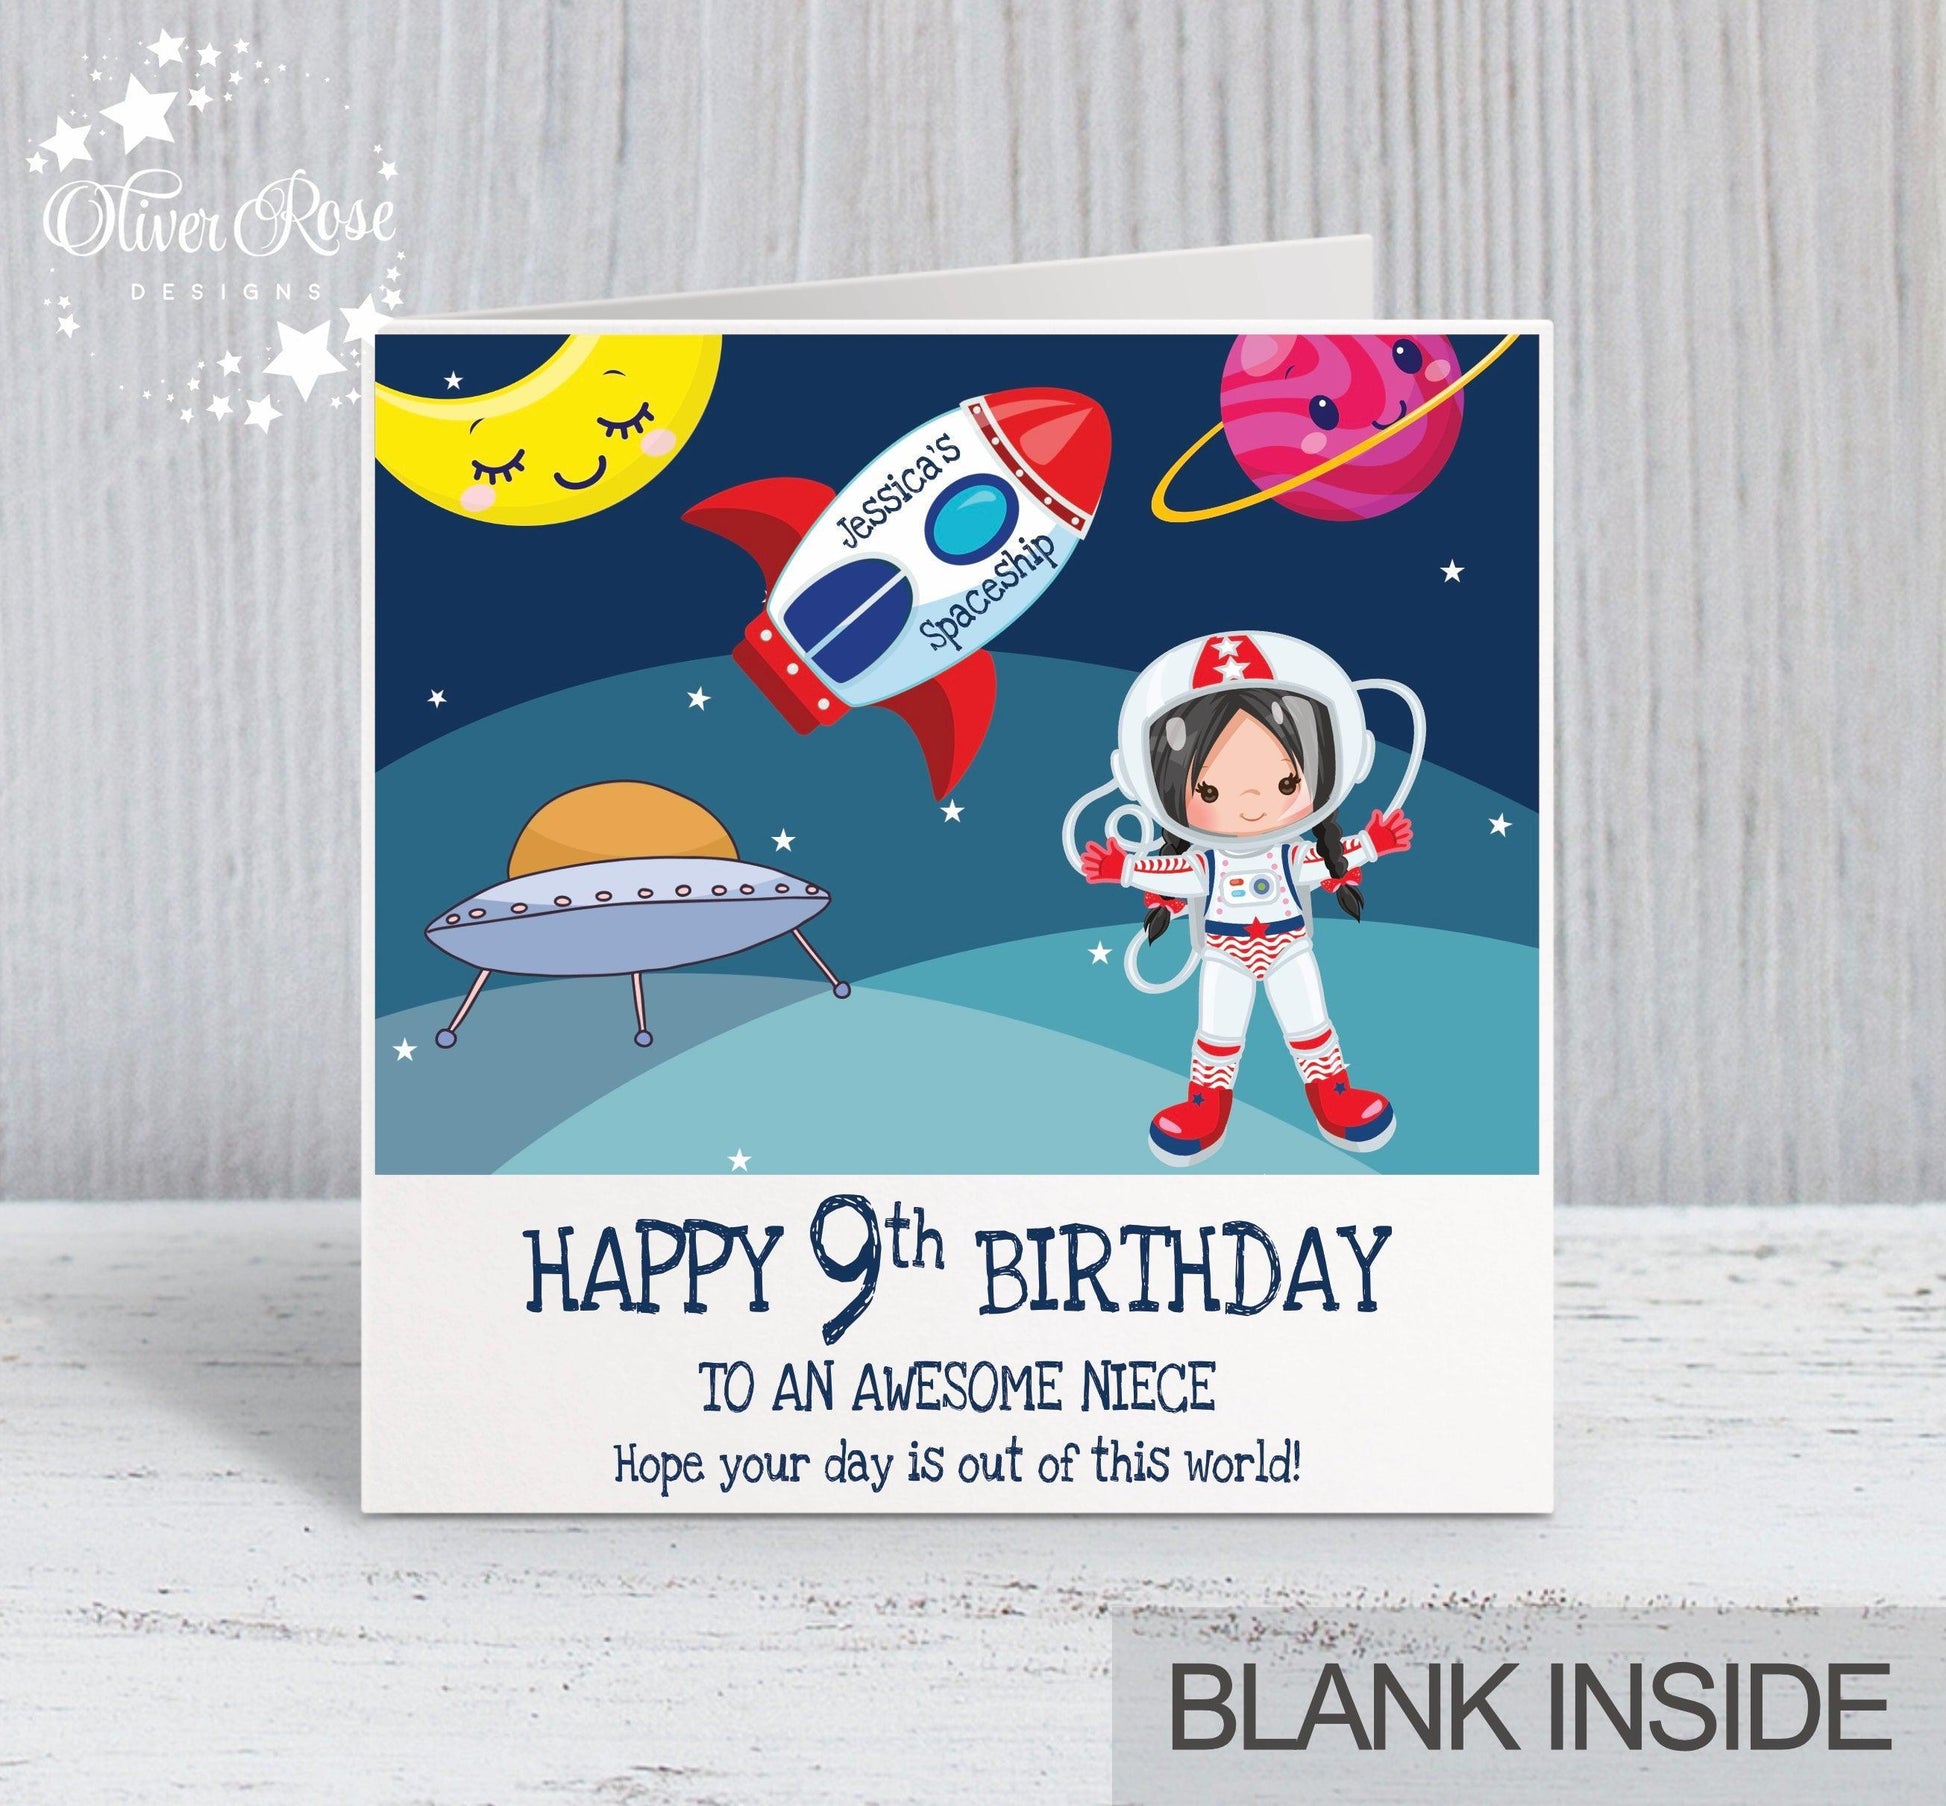 Space Astronaut Theme Birthday Card, for Girls, Any hair colour, Personalised Card, Any Age, Any Relationship